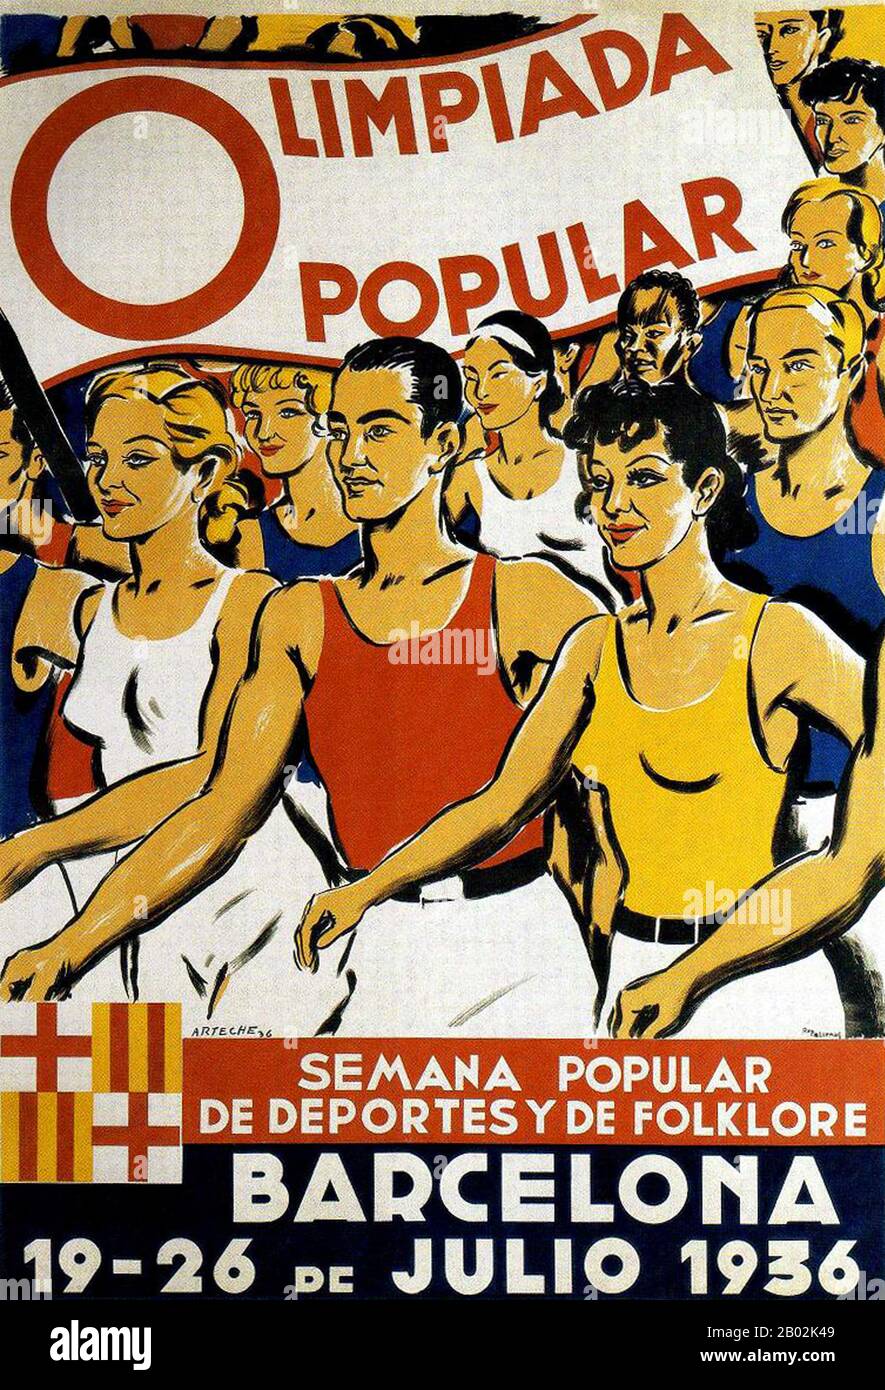 The People's Olympiad (Catalan: Olimpíada Popular, Spanish Olimpiada Popular) was a planned international multi-sport event that was intended to take place in Barcelona, the capital of the autonomous region of Catalonia within the Spanish Republic. It was conceived as a protest event against the 1936 Summer Olympics being held in Berlin during the Nazi regime.  Despite gaining considerable support, the People's Olympiad was never held, as a result of the outbreak of the Spanish Civil War. Barcelona would later host the 1992 Summer Olympics, after the Spanish transition to democracy that follow Stock Photo